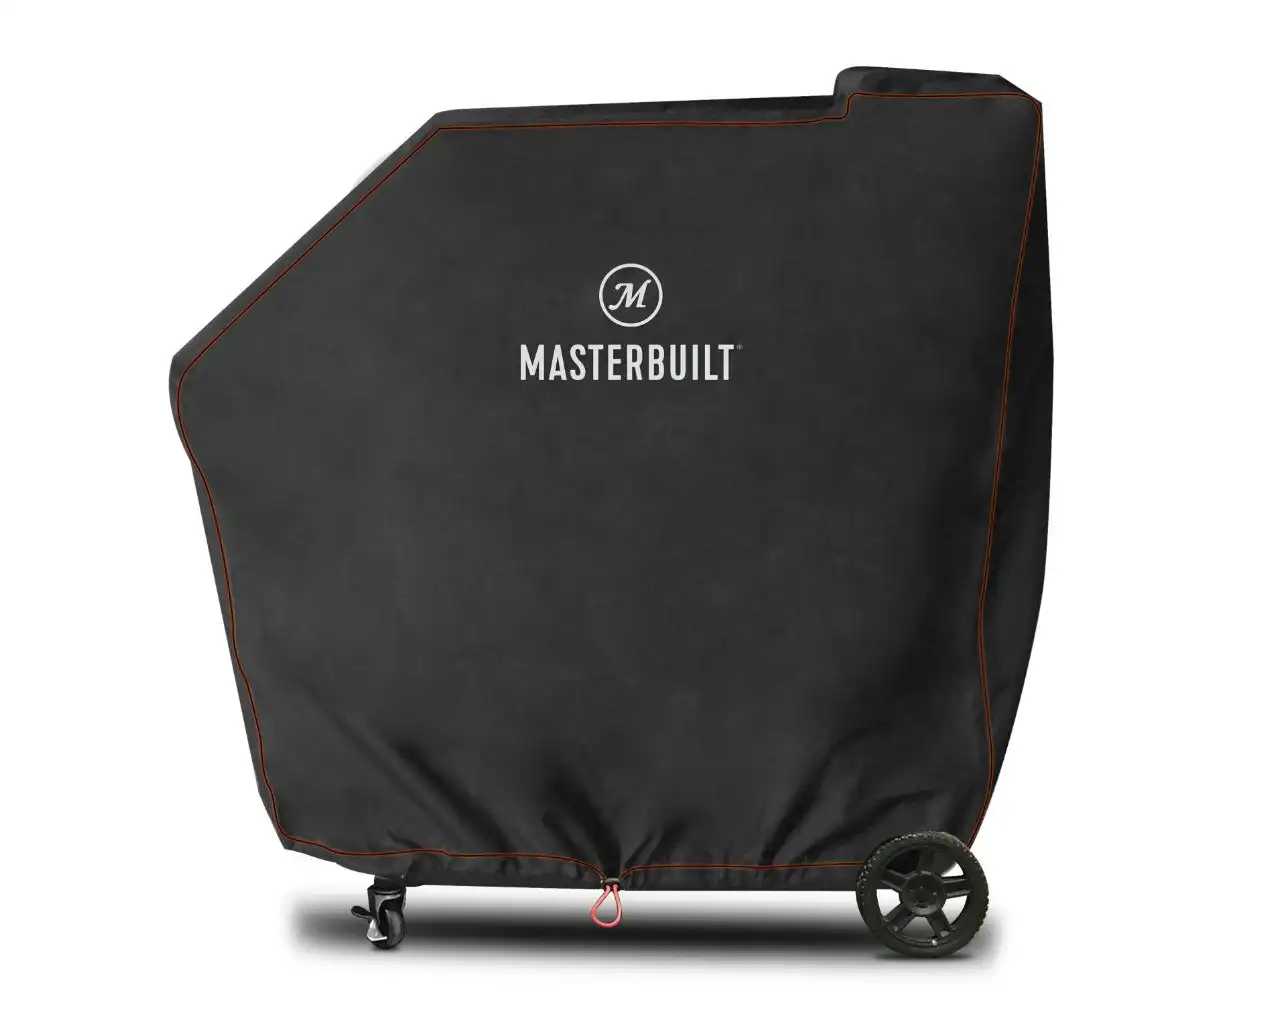 Masterbuilt AutoIgnite Digital Charcoal and Gravity Series Grill and Smoker BBQ Cover